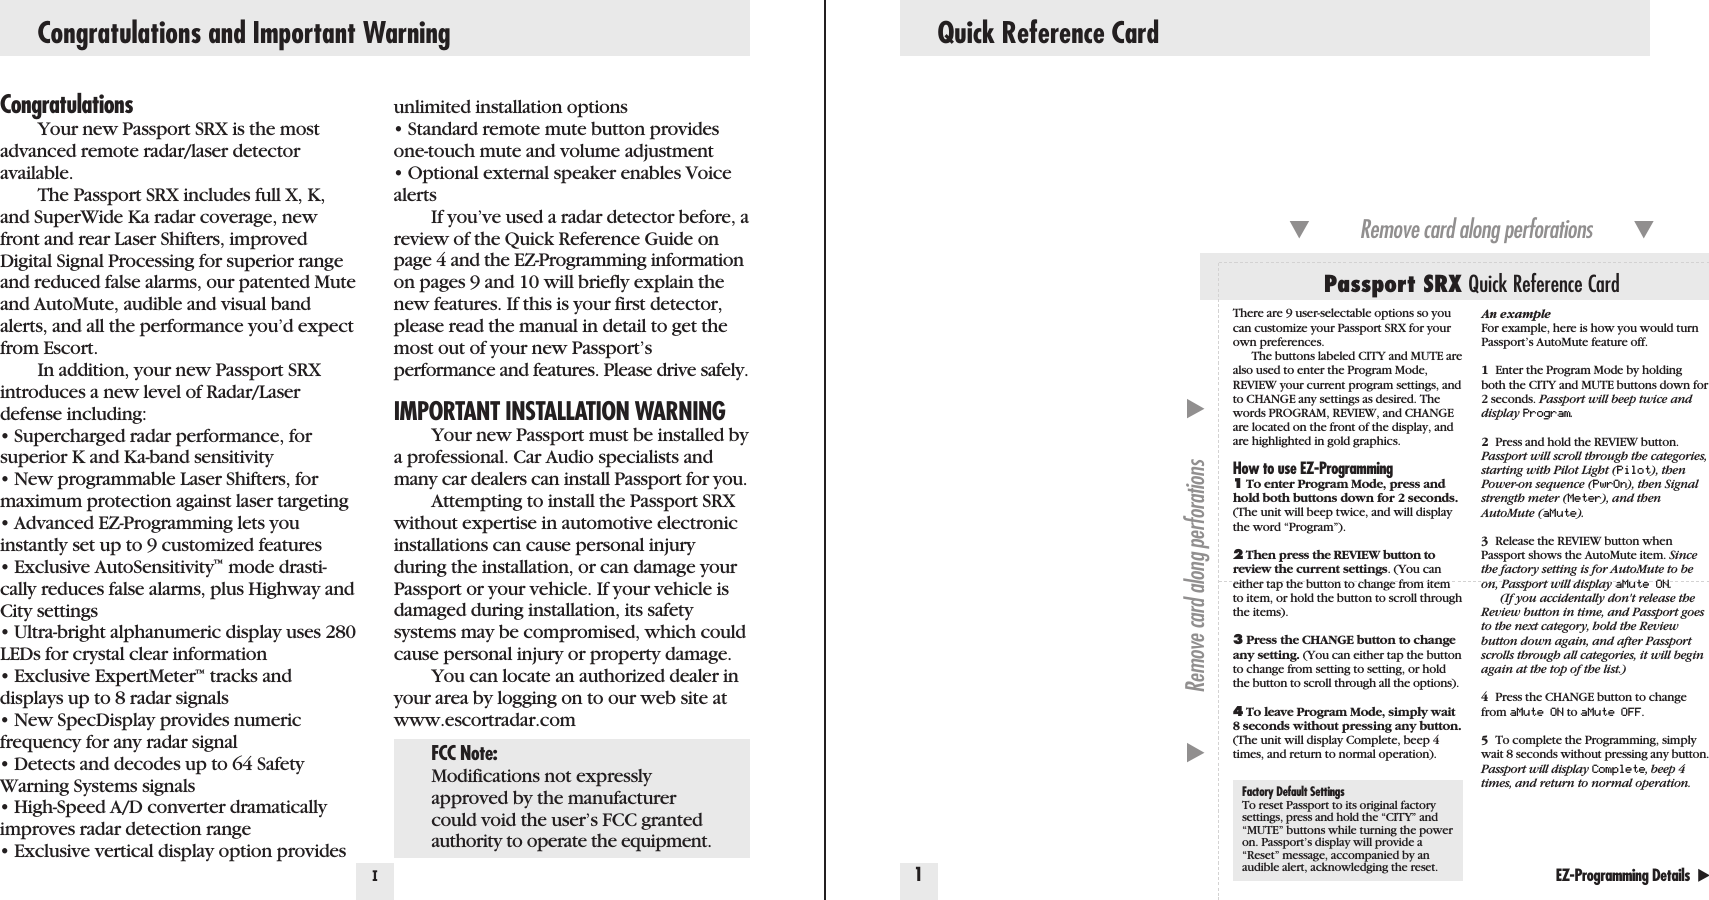 Quick Reference Card1IEZ-Programming Details  Factory Default SettingsTo reset Passport to its original factorysettings, press and hold the “CITY” and“MUTE” buttons while turning the poweron. Passport’s display will provide a“Reset” message, accompanied by anaudible alert, acknowledging the reset.Passport SRX Quick Reference CardRemove card along perforations         Remove card along perforations         Congratulations and Important WarningCongratulationsYour new Passport SRX is the mostadvanced remote radar/laser detector available.The Passport SRX includes full X, K,and SuperWide Ka radar coverage, newfront and rear Laser Shifters, improvedDigital Signal Processing for superior rangeand reduced false alarms, our patented Muteand AutoMute, audible and visual bandalerts, and all the performance you’d expectfrom Escort.In addition, your new Passport SRXintroduces a new level of Radar/Laserdefense including:• Supercharged radar performance, forsuperior K and Ka-band sensitivity • New programmable Laser Shifters, formaximum protection against laser targeting• Advanced EZ-Programming lets youinstantly set up to 9 customized features• Exclusive AutoSensitivity™mode drasti-cally reduces false alarms, plus Highway andCity settings• Ultra-bright alphanumeric display uses 280LEDs for crystal clear information• Exclusive ExpertMeter™tracks anddisplays up to 8 radar signals• New SpecDisplay provides numericfrequency for any radar signal• Detects and decodes up to 64 SafetyWarning Systems signals• High-Speed A/D converter dramaticallyimproves radar detection range• Exclusive vertical display option providesunlimited installation options• Standard remote mute button providesone-touch mute and volume adjustment• Optional external speaker enables VoicealertsIf you’ve used a radar detector before, areview of the Quick Reference Guide onpage 4 and the EZ-Programming informationon pages 9 and 10 will briefly explain thenew features. If this is your first detector,please read the manual in detail to get themost out of your new Passport’s performance and features. Please drive safely.IMPORTANT INSTALLATION WARNINGYour new Passport must be installed bya professional. Car Audio specialists andmany car dealers can install Passport for you.Attempting to install the Passport SRXwithout expertise in automotive electronicinstallations can cause personal injuryduring the installation, or can damage yourPassport or your vehicle. If your vehicle isdamaged during installation, its safetysystems may be compromised, which couldcause personal injury or property damage.You can locate an authorized dealer inyour area by logging on to our web site atwww.escortradar.comThere are 9 user-selectable options so youcan customize your Passport SRX for yourown preferences. The buttons labeled CITY and MUTE arealso used to enter the Program Mode,REVIEW your current program settings, andto CHANGE any settings as desired. Thewords PROGRAM, REVIEW, and CHANGEare located on the front of the display, andare highlighted in gold graphics.How to use EZ-Programming1To enter Program Mode, press andhold both buttons down for 2 seconds.(The unit will beep twice, and will displaythe word “Program”).2Then press the REVIEW button toreview the current settings. (You caneither tap the button to change from itemto item, or hold the button to scroll throughthe items).3Press the CHANGE button to changeany setting. (You can either tap the buttonto change from setting to setting, or holdthe button to scroll through all the options).4To leave Program Mode, simply wait8 seconds without pressing any button.(The unit will display Complete, beep 4times, and return to normal operation).An exampleFor example, here is how you would turnPassport’s AutoMute feature off. 1Enter the Program Mode by holding both the CITY and MUTE buttons down for 2 seconds. Passport will beep twice anddisplay Program.2Press and hold the REVIEW button. Passport will scroll through the categories,starting with Pilot Light (Pilot), thenPower-on sequence (PwrOn), then Signalstrength meter (Meter), and thenAutoMute (aMute).3Release the REVIEW button whenPassport shows the AutoMute item. Sincethe factory setting is for AutoMute to beon, Passport will display aMute ON.(If you accidentally don&apos;t release theReview button in time, and Passport goesto the next category, hold the Reviewbutton down again, and after Passportscrolls through all categories, it will beginagain at the top of the list.)4Press the CHANGE button to changefrom aMute ON to aMute OFF.5To complete the Programming, simplywait 8 seconds without pressing any button.Passport will display Complete, beep 4times, and return to normal operation.FCC Note:Modifications not expresslyapproved by the manufacturercould void the user’s FCC grantedauthority to operate the equipment.